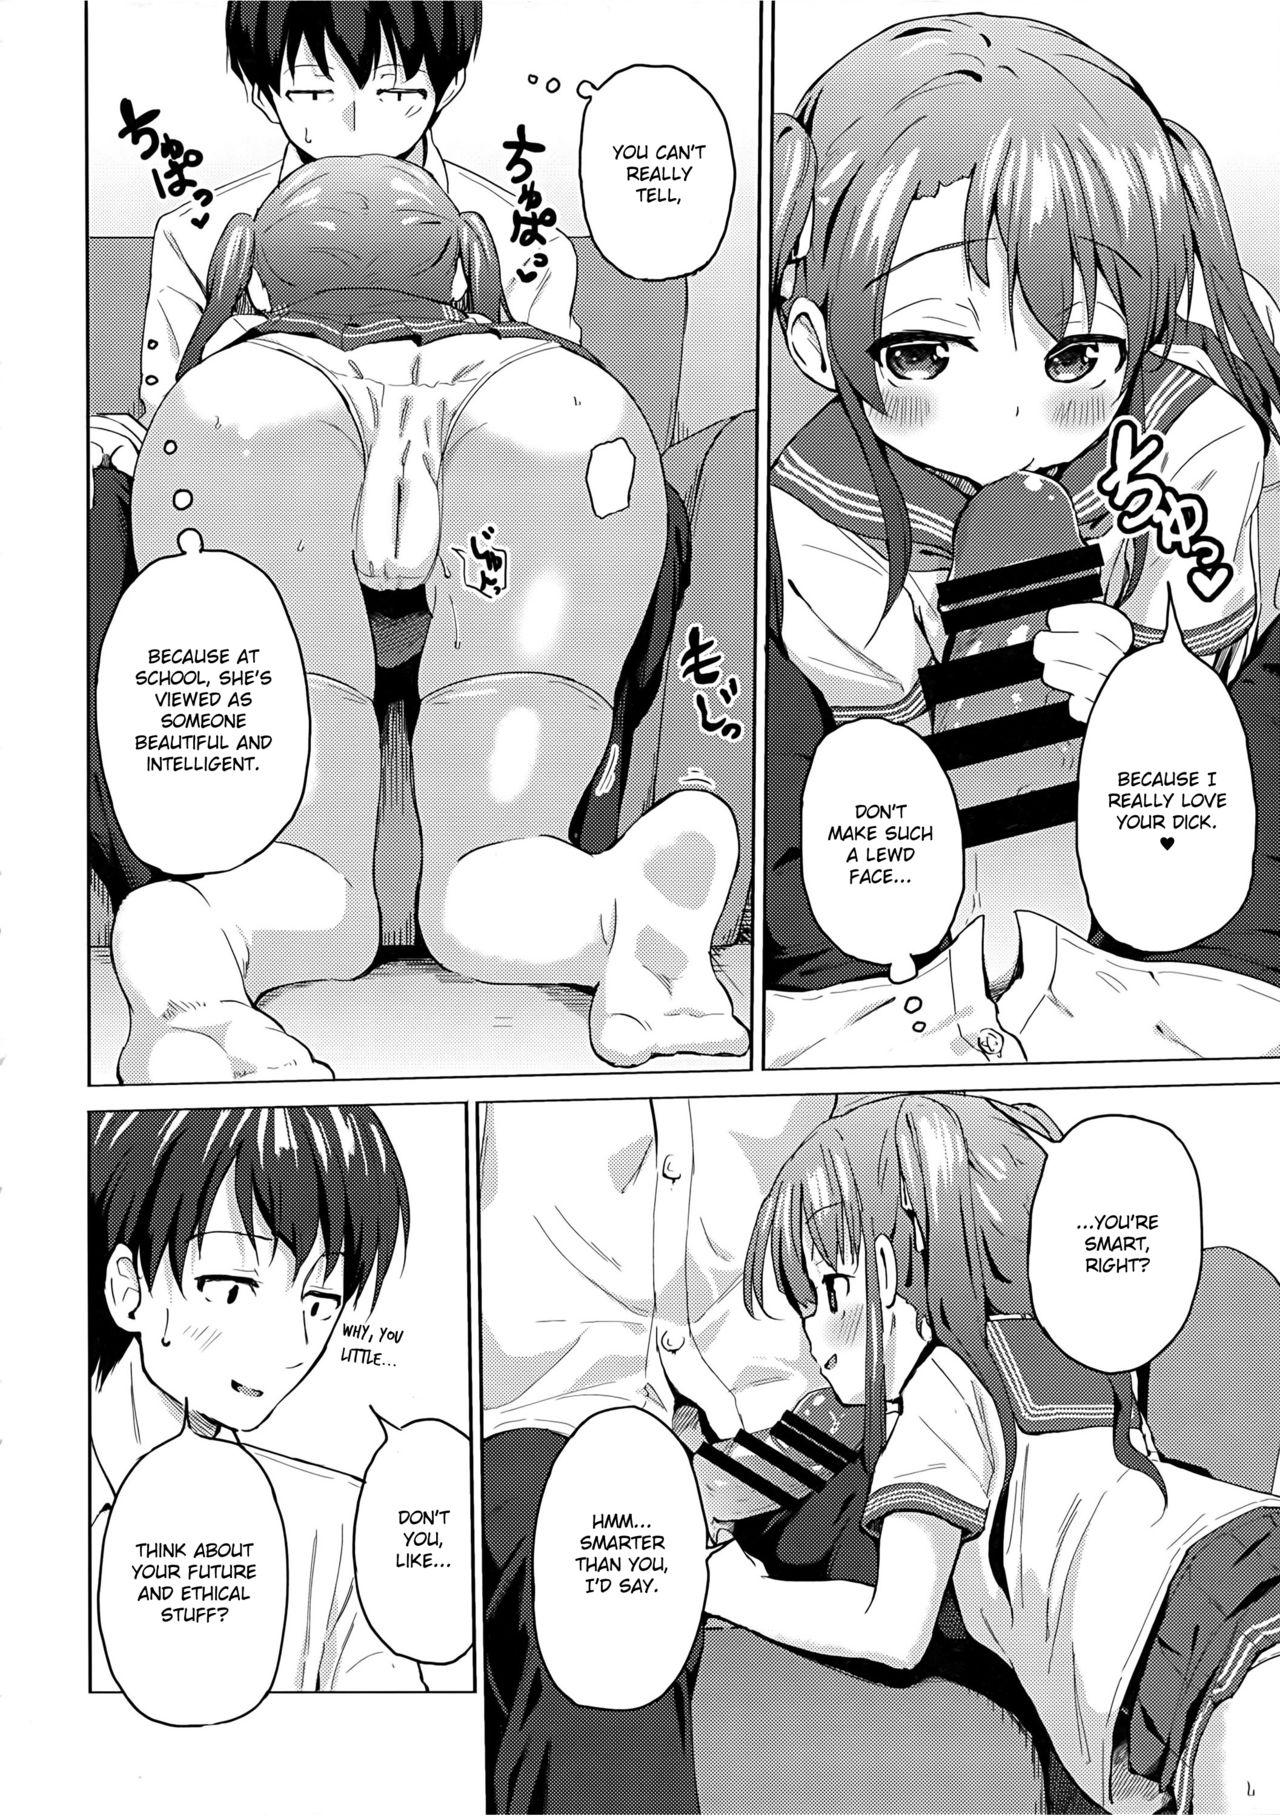 Amature Imouto wa Ani Senyou | A Little Sister Is Exclusive Only for Her Big Brother - Original Best Blow Jobs Ever - Page 7